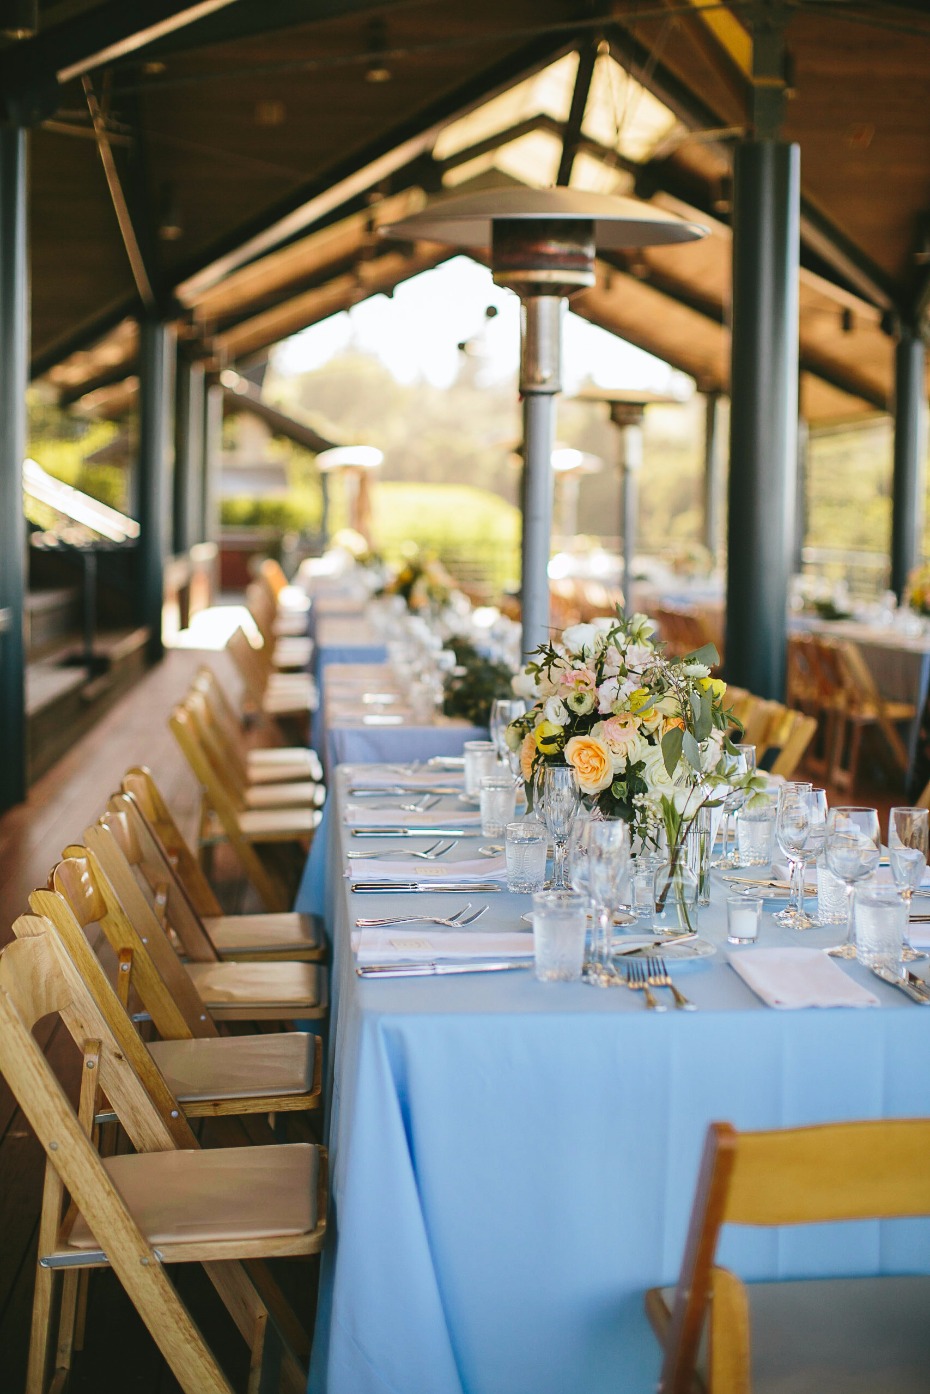 Thomas Fogerty Winery for your wedding reception